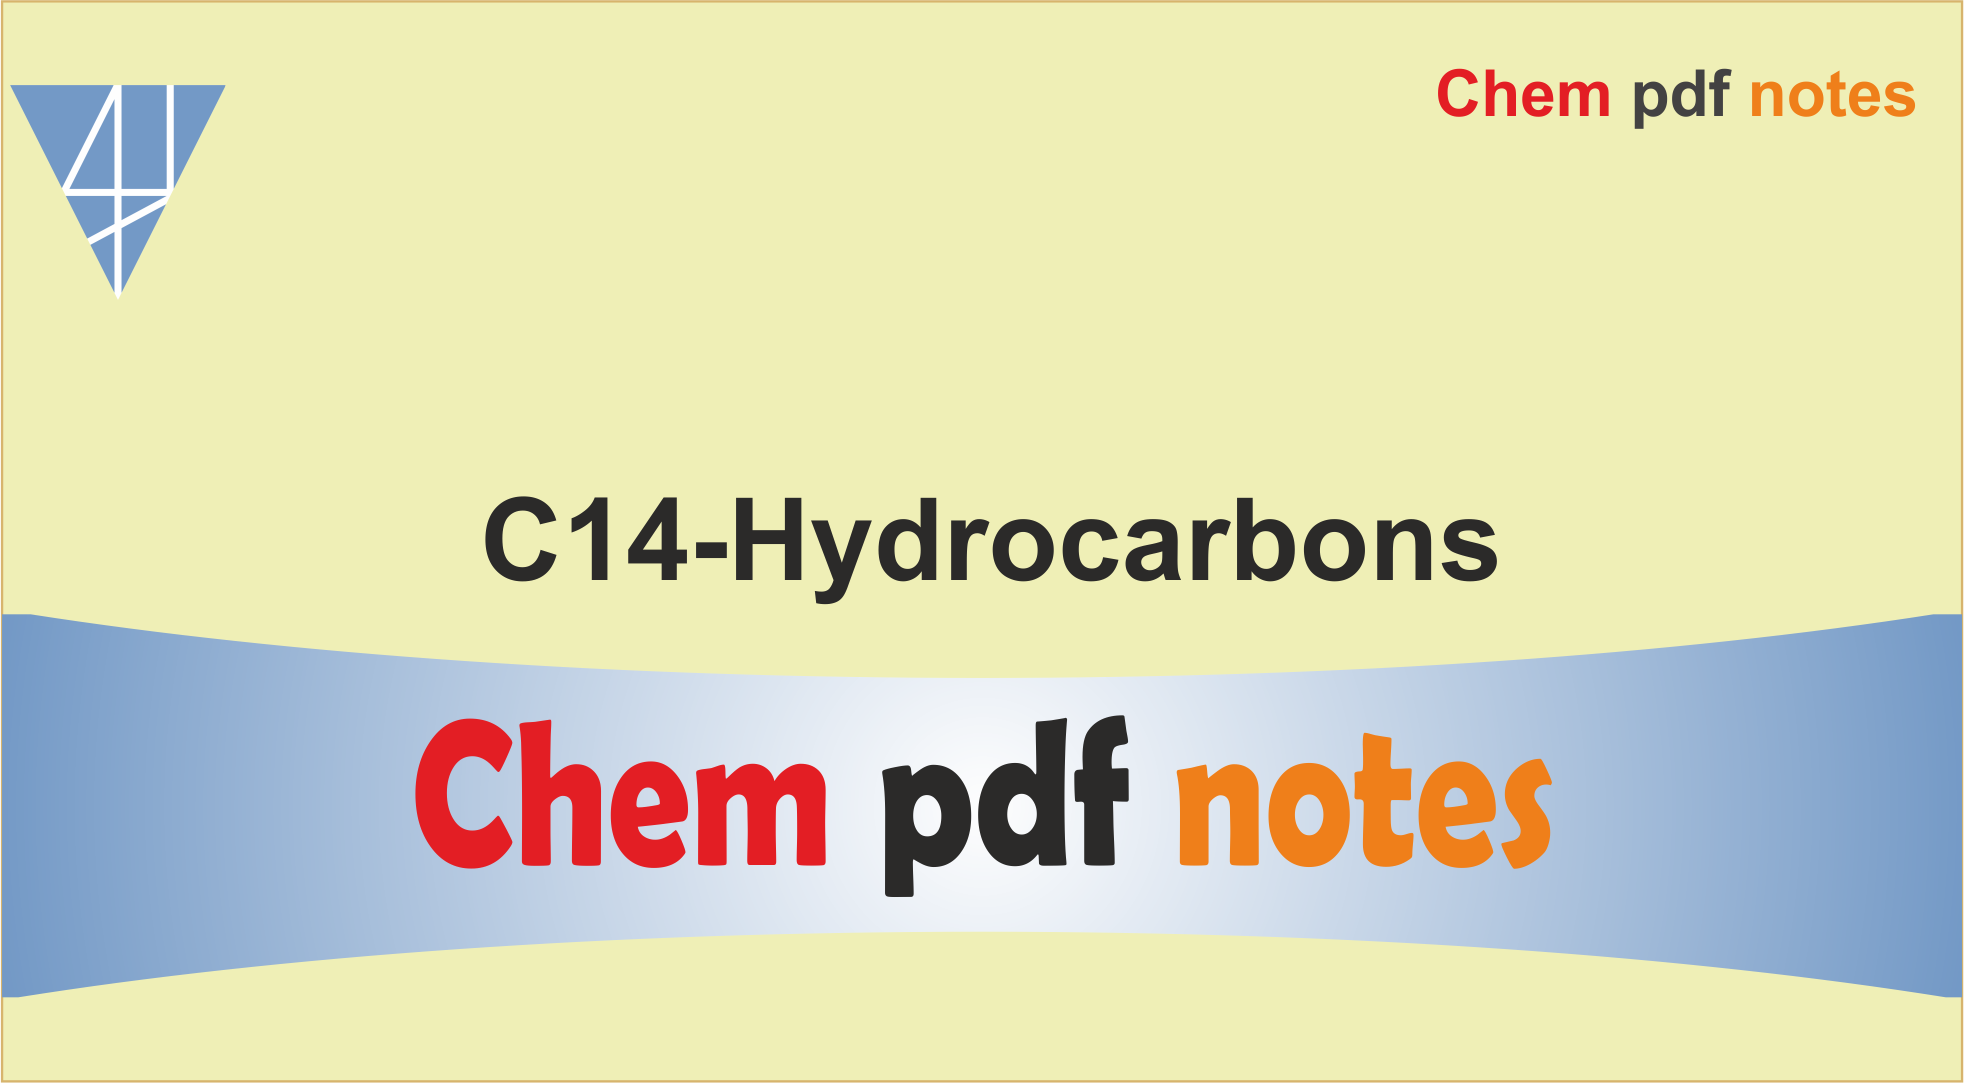 C14-Hydrocarbons